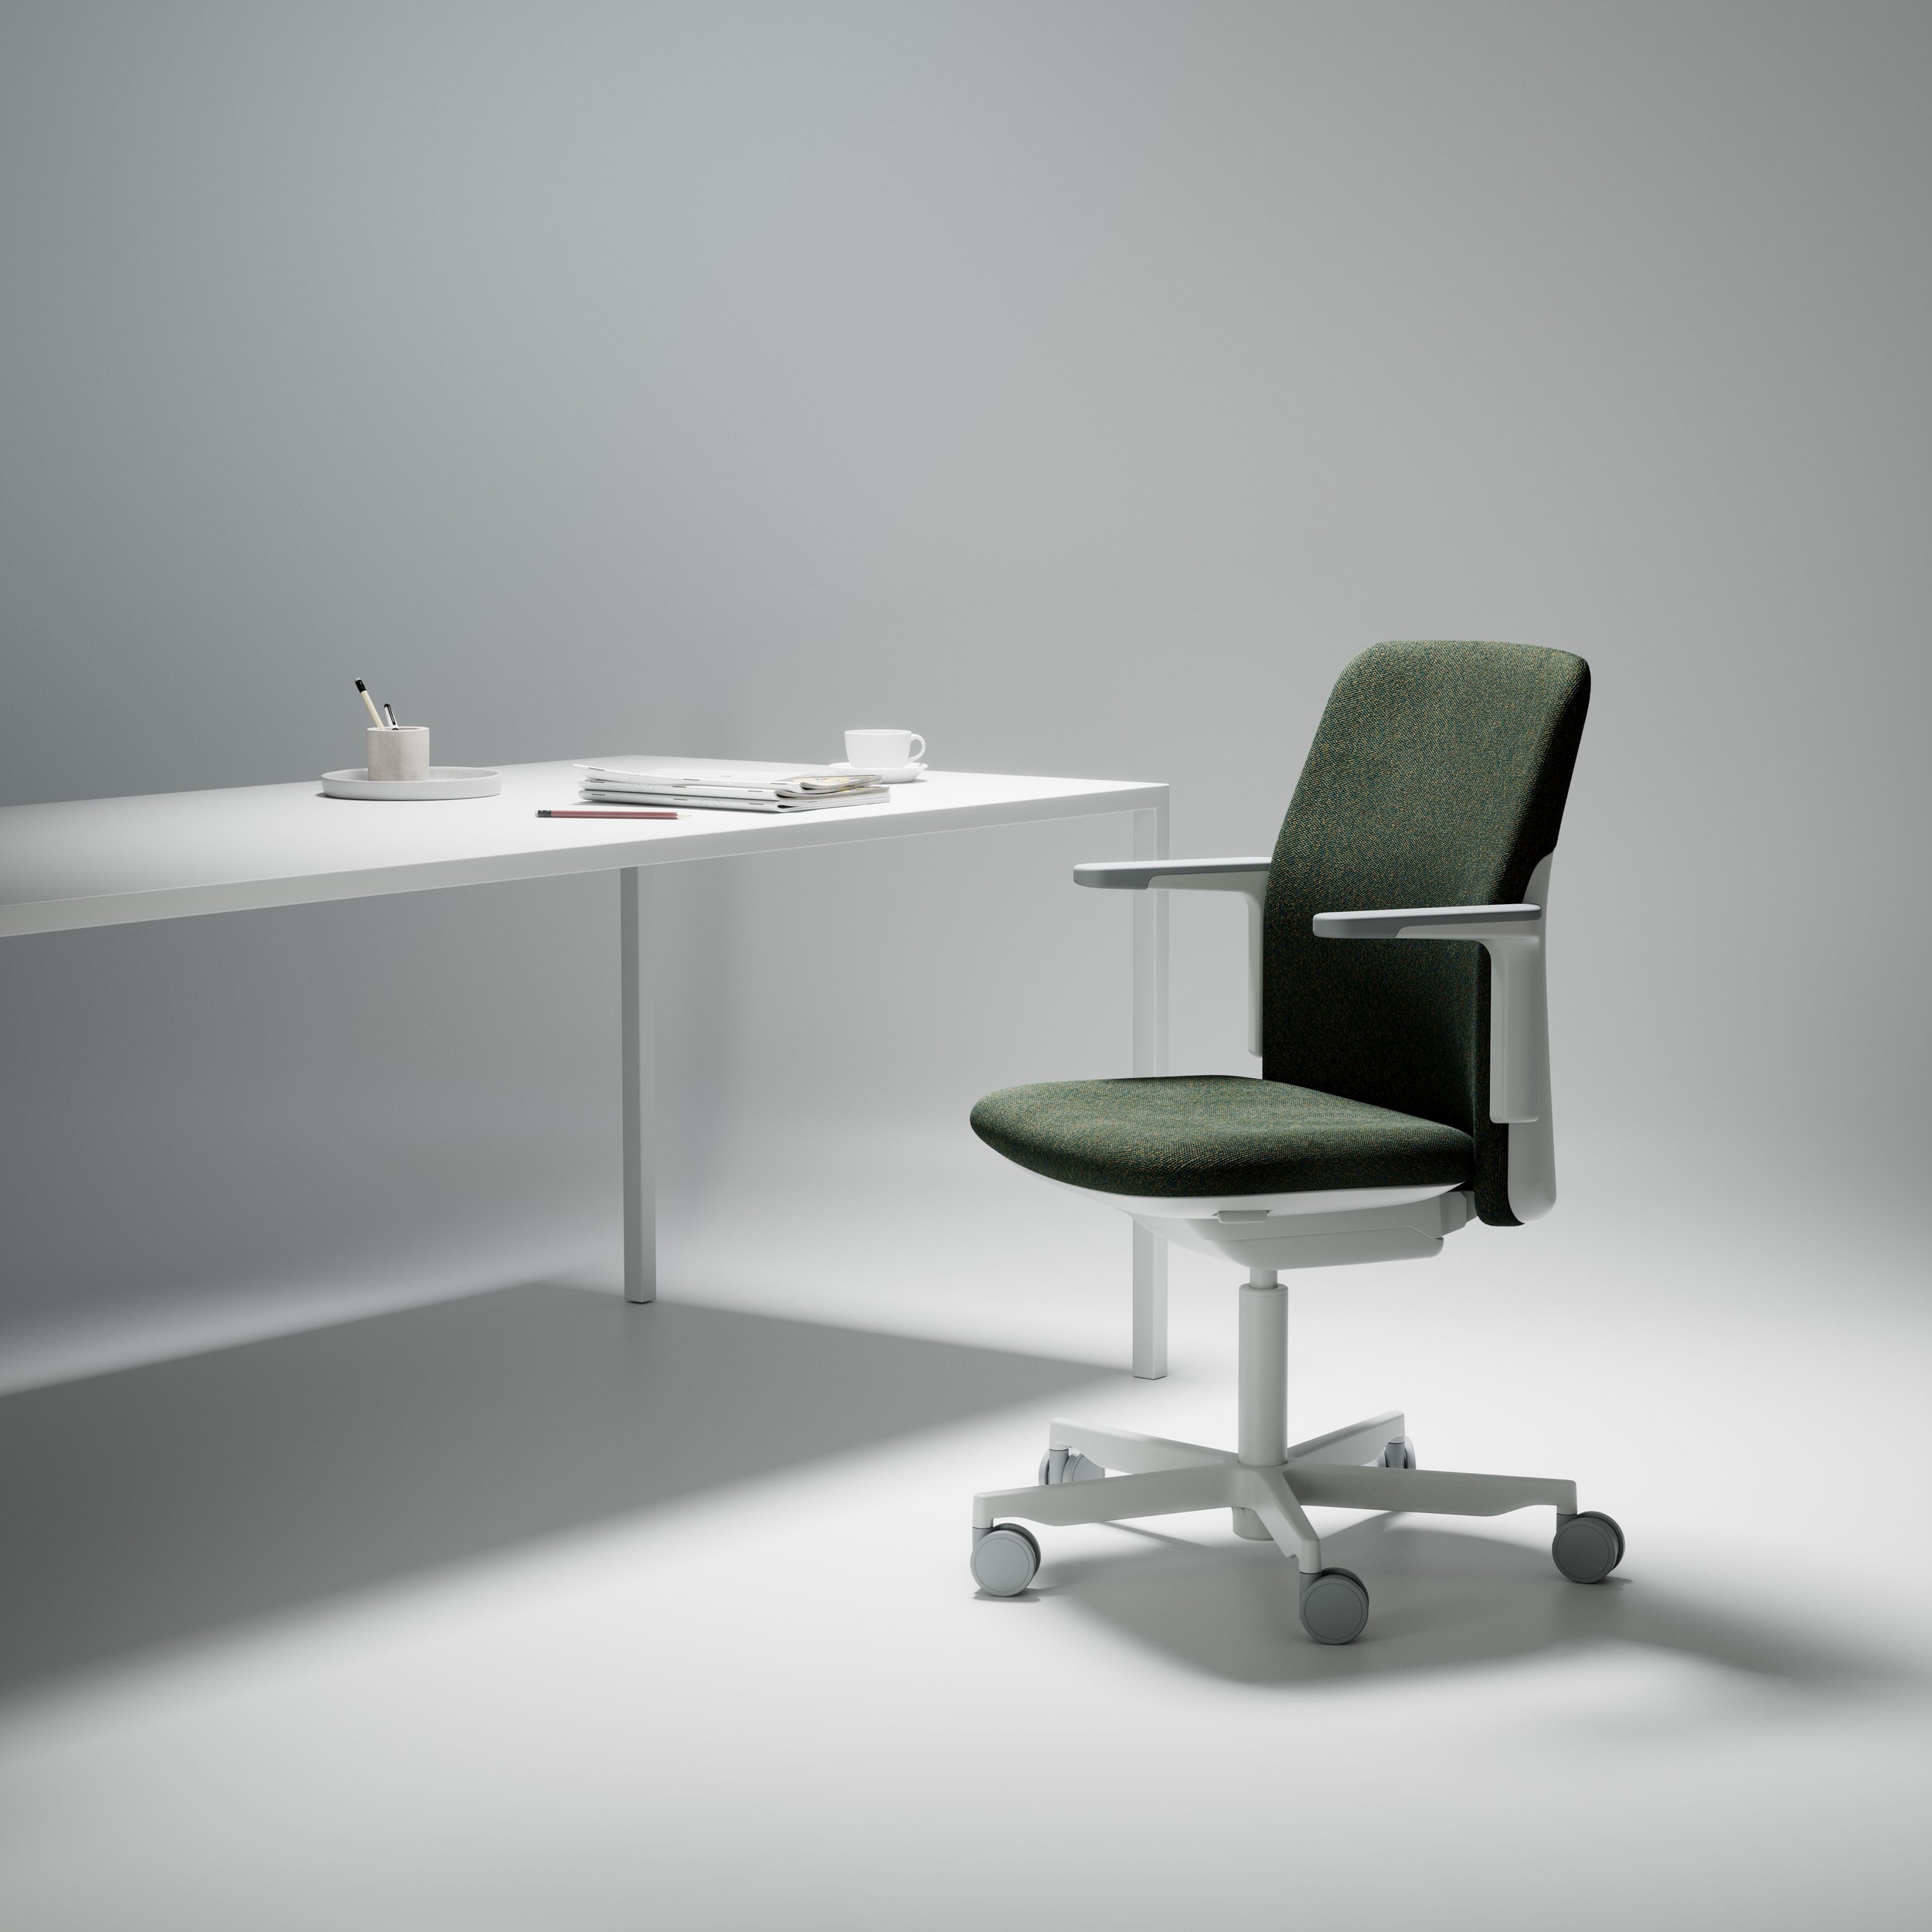 Humanscale_Path by Todd Bracher Studio_FormSense Eco Knit™ in Moss_01.jpeg